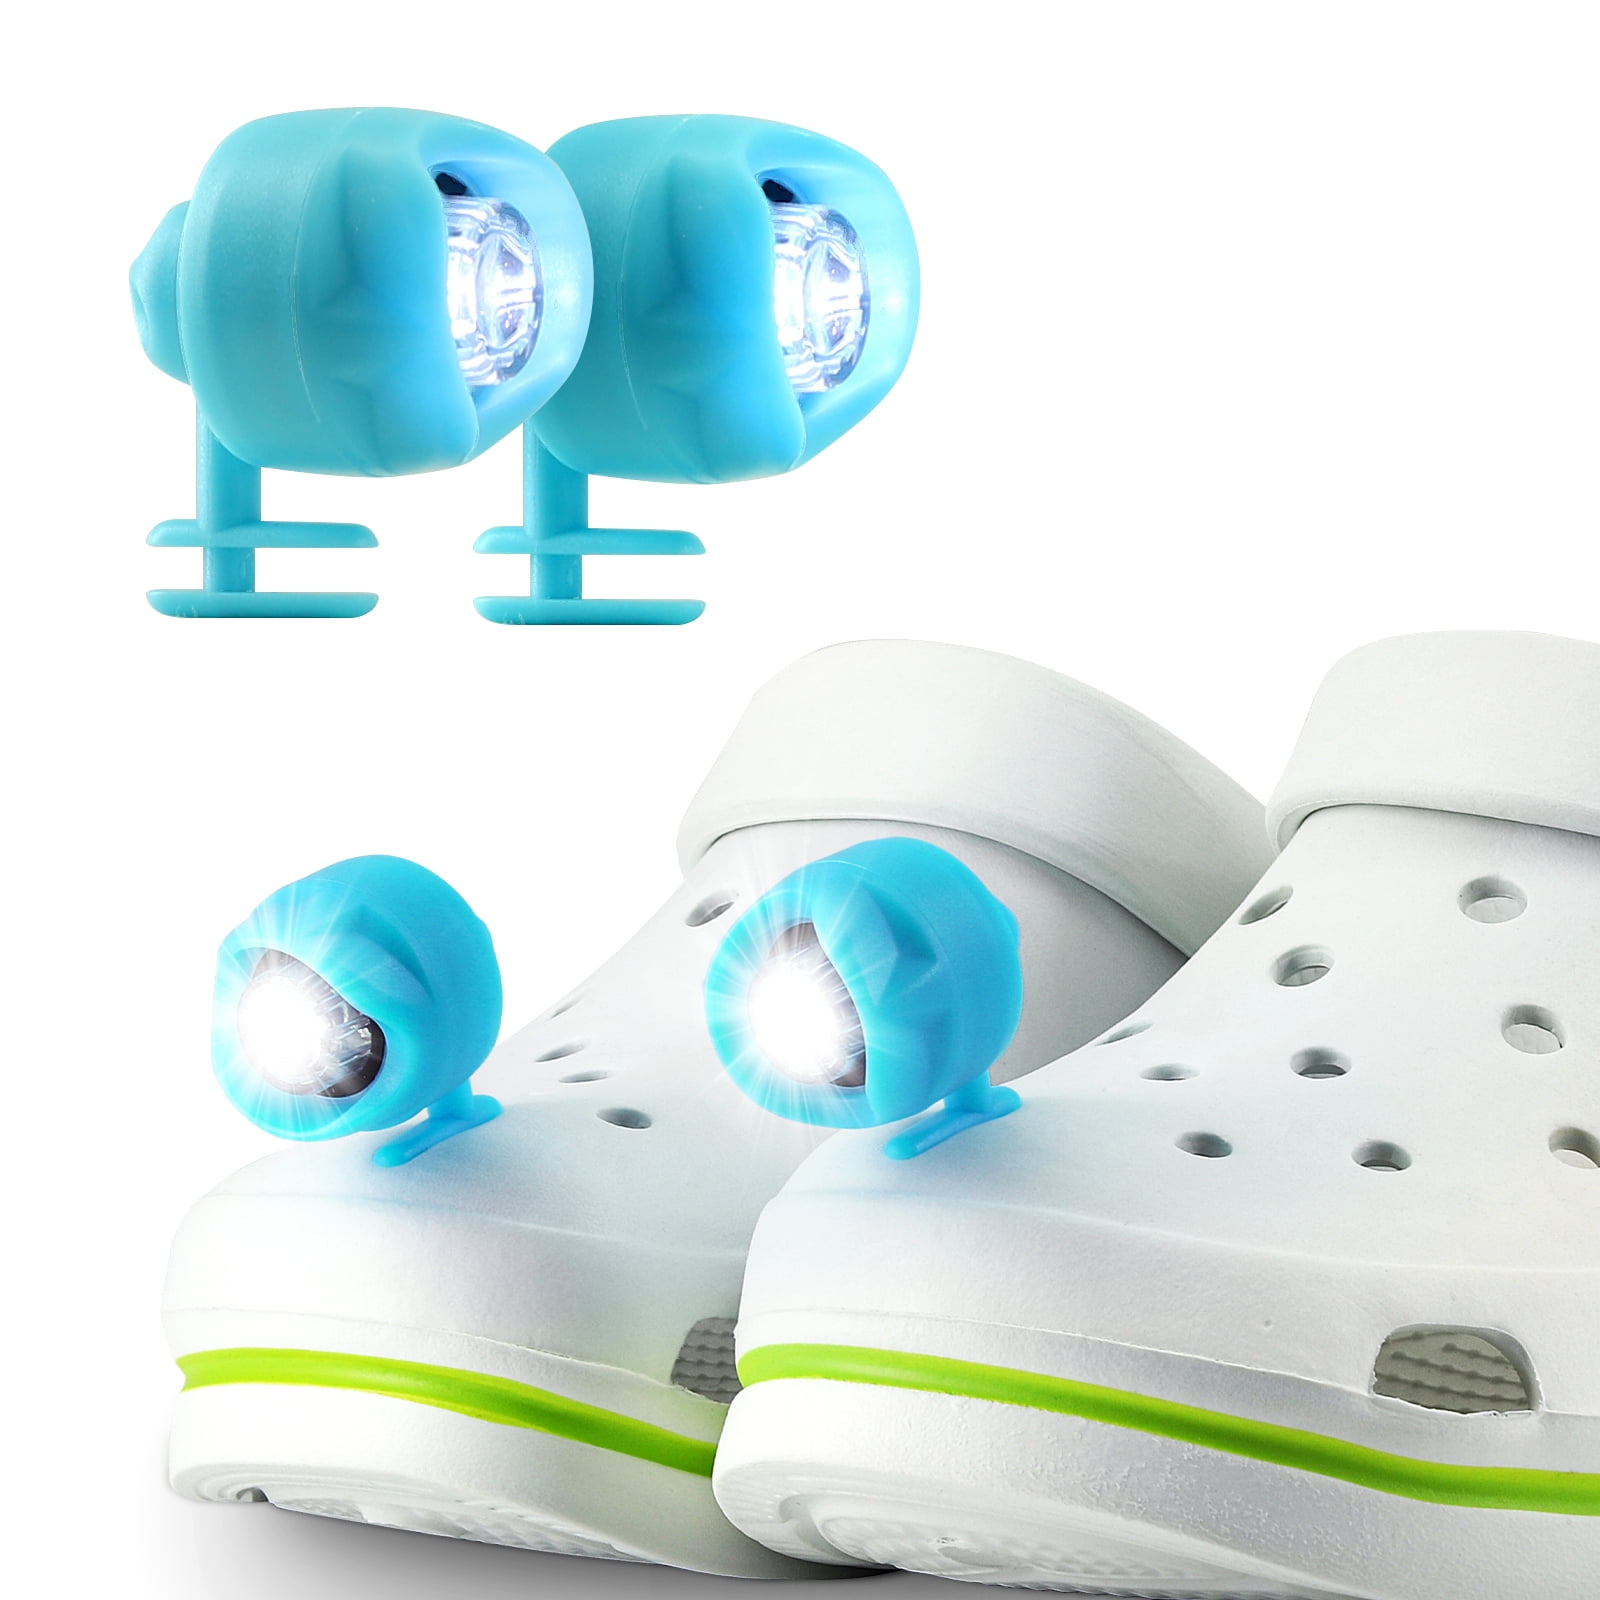 You can't have Crocs without Croc lights